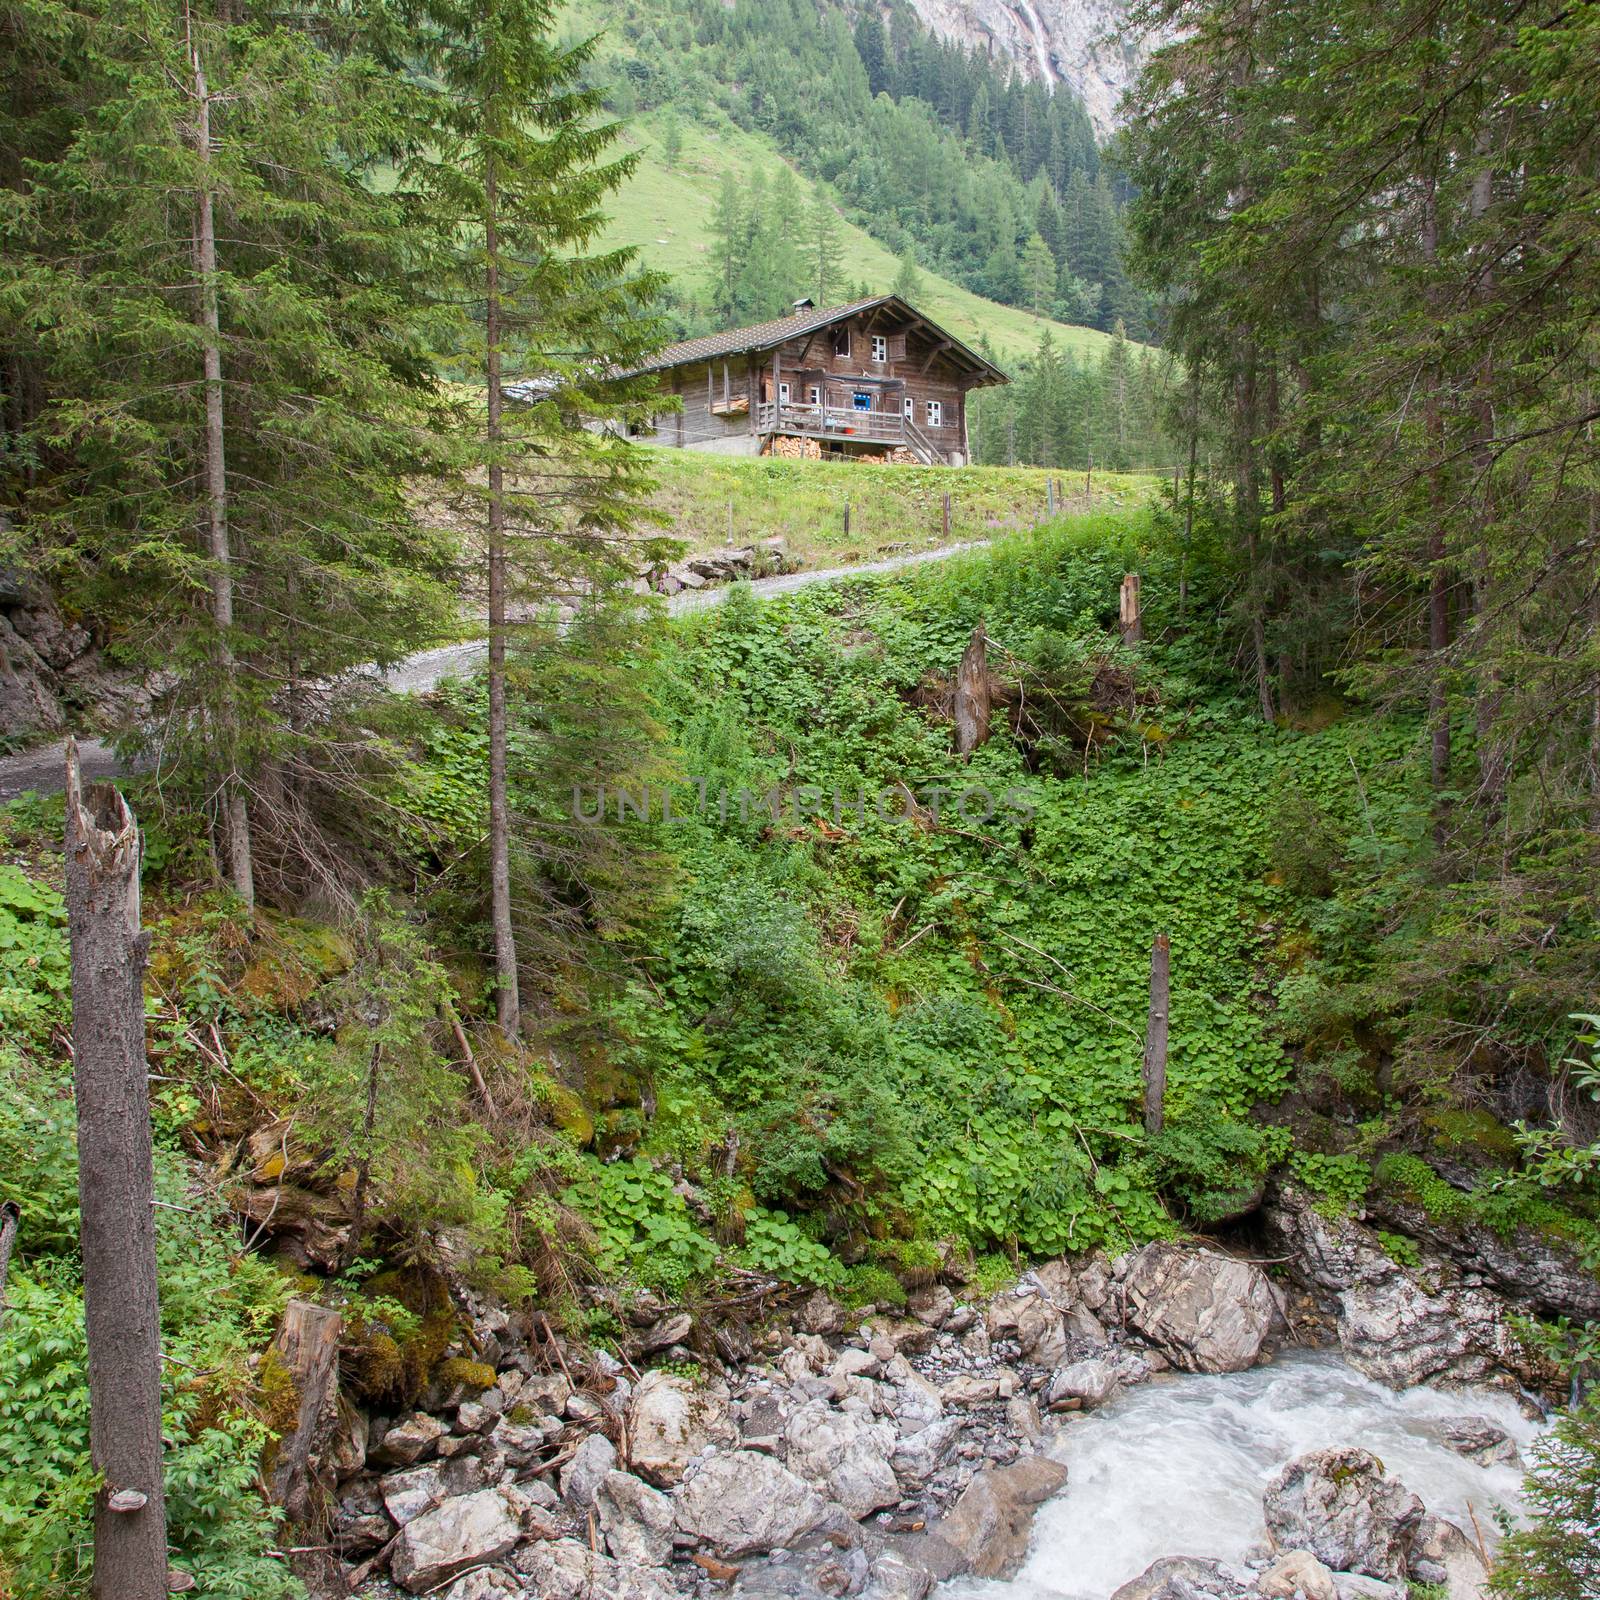 Typical house in the Swiss alps by michaklootwijk